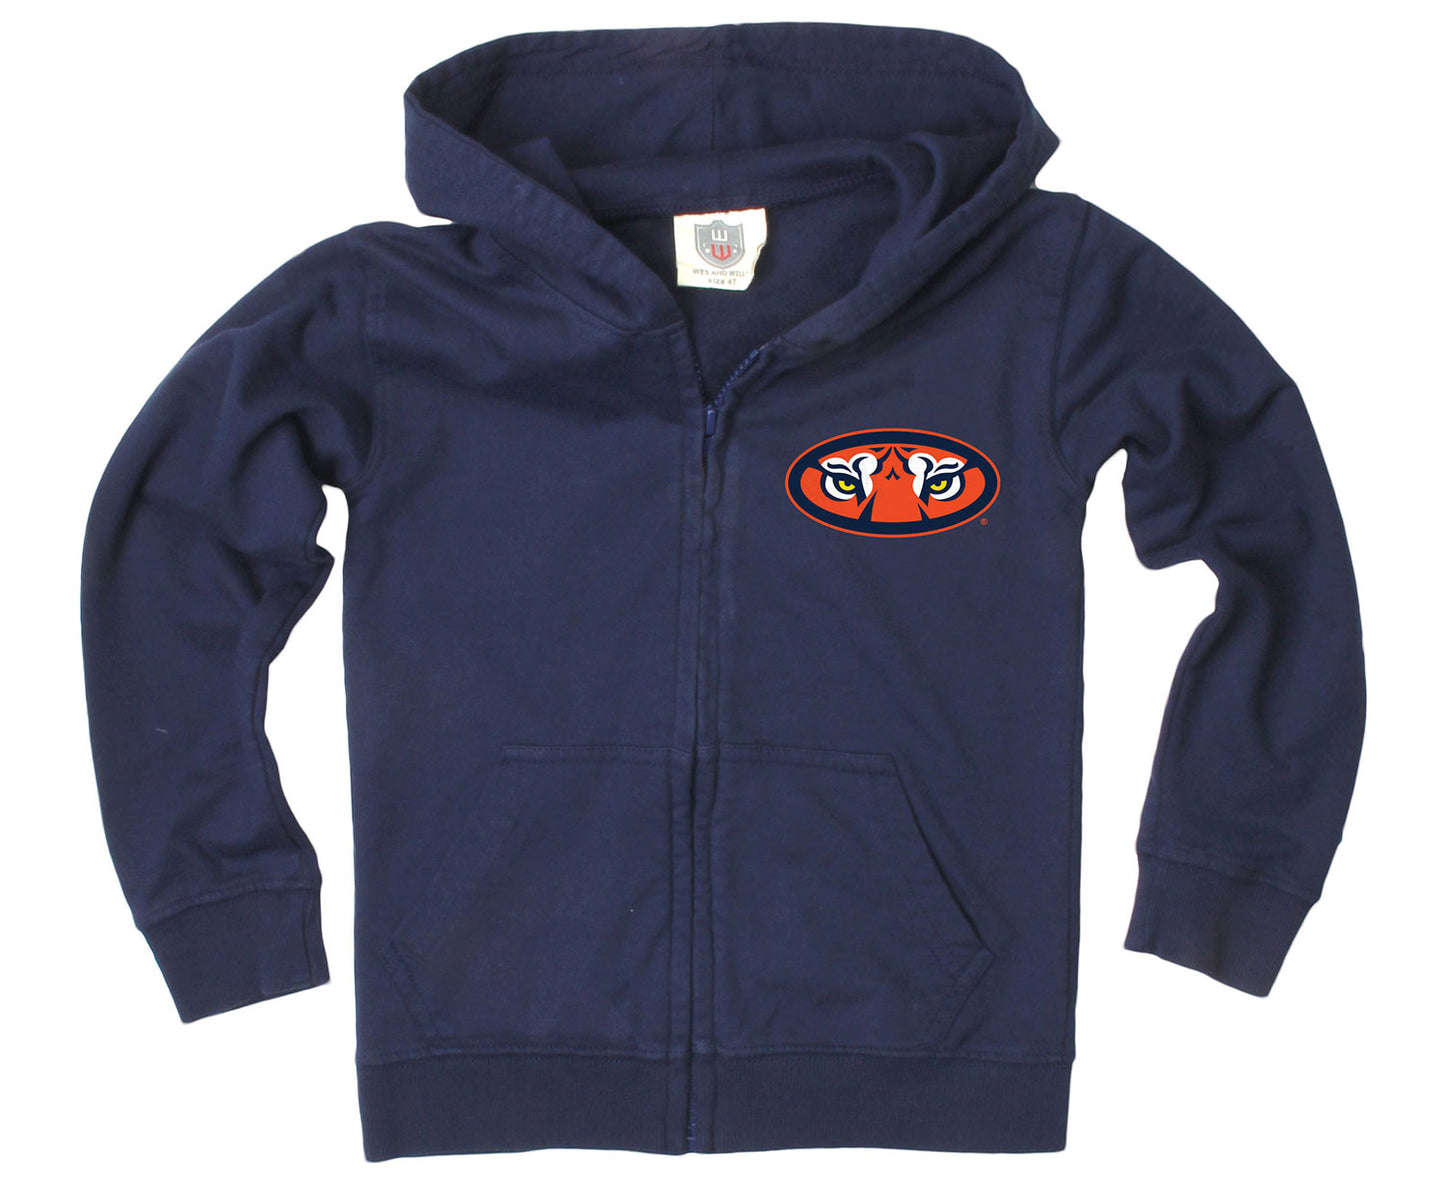 Auburn Tigers Wes and Willy Boys Zip Up Fleece Hooded Jacket